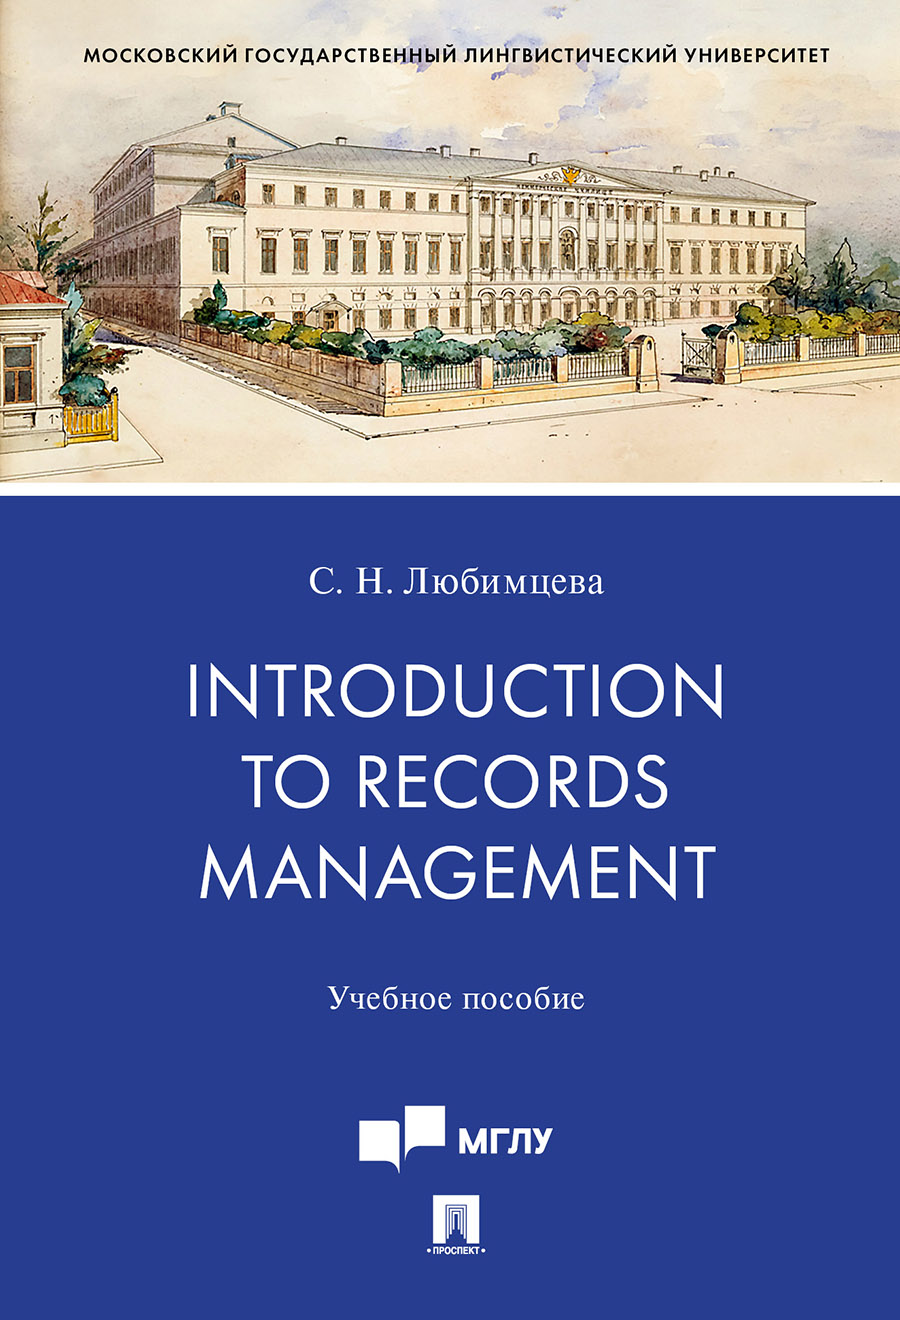 Introduction to Records Management.. .-.:,2021. /=236958/